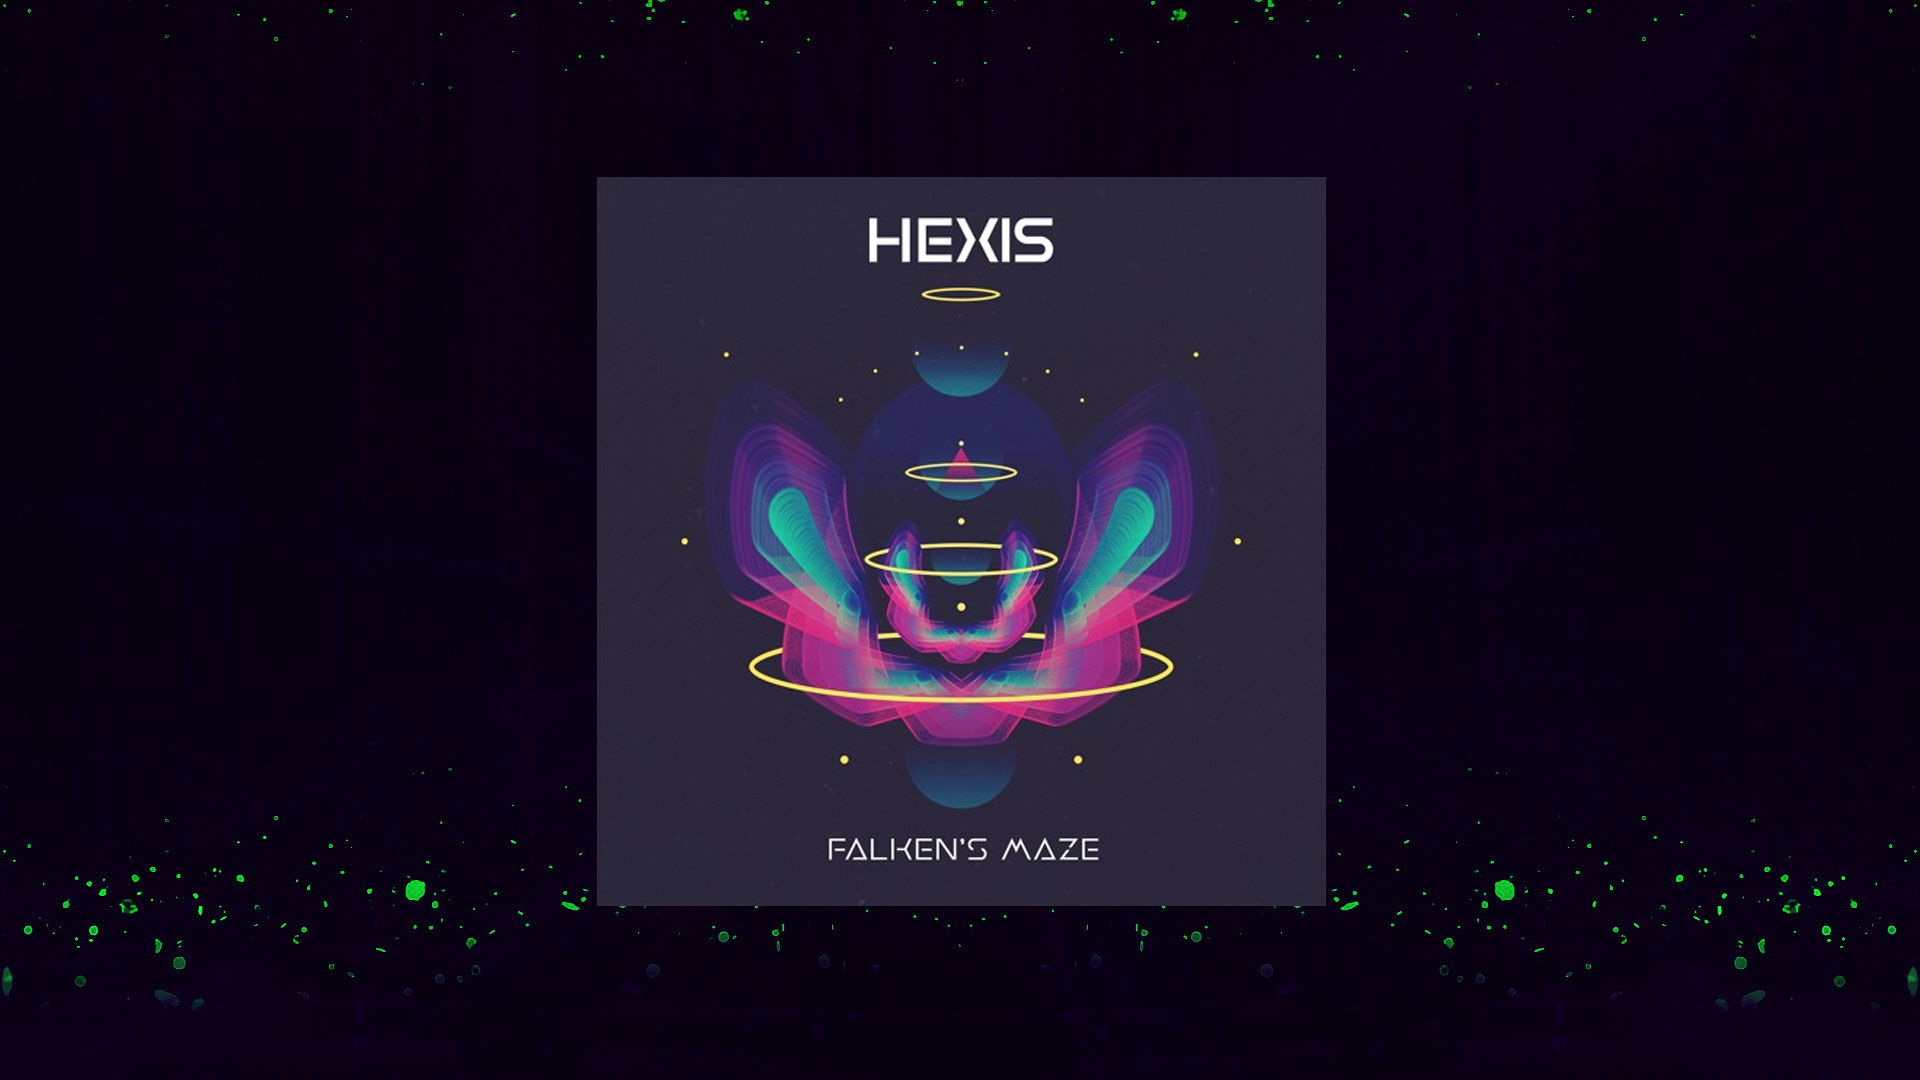 New Electronic Music release Falkan's Maze by Hexis